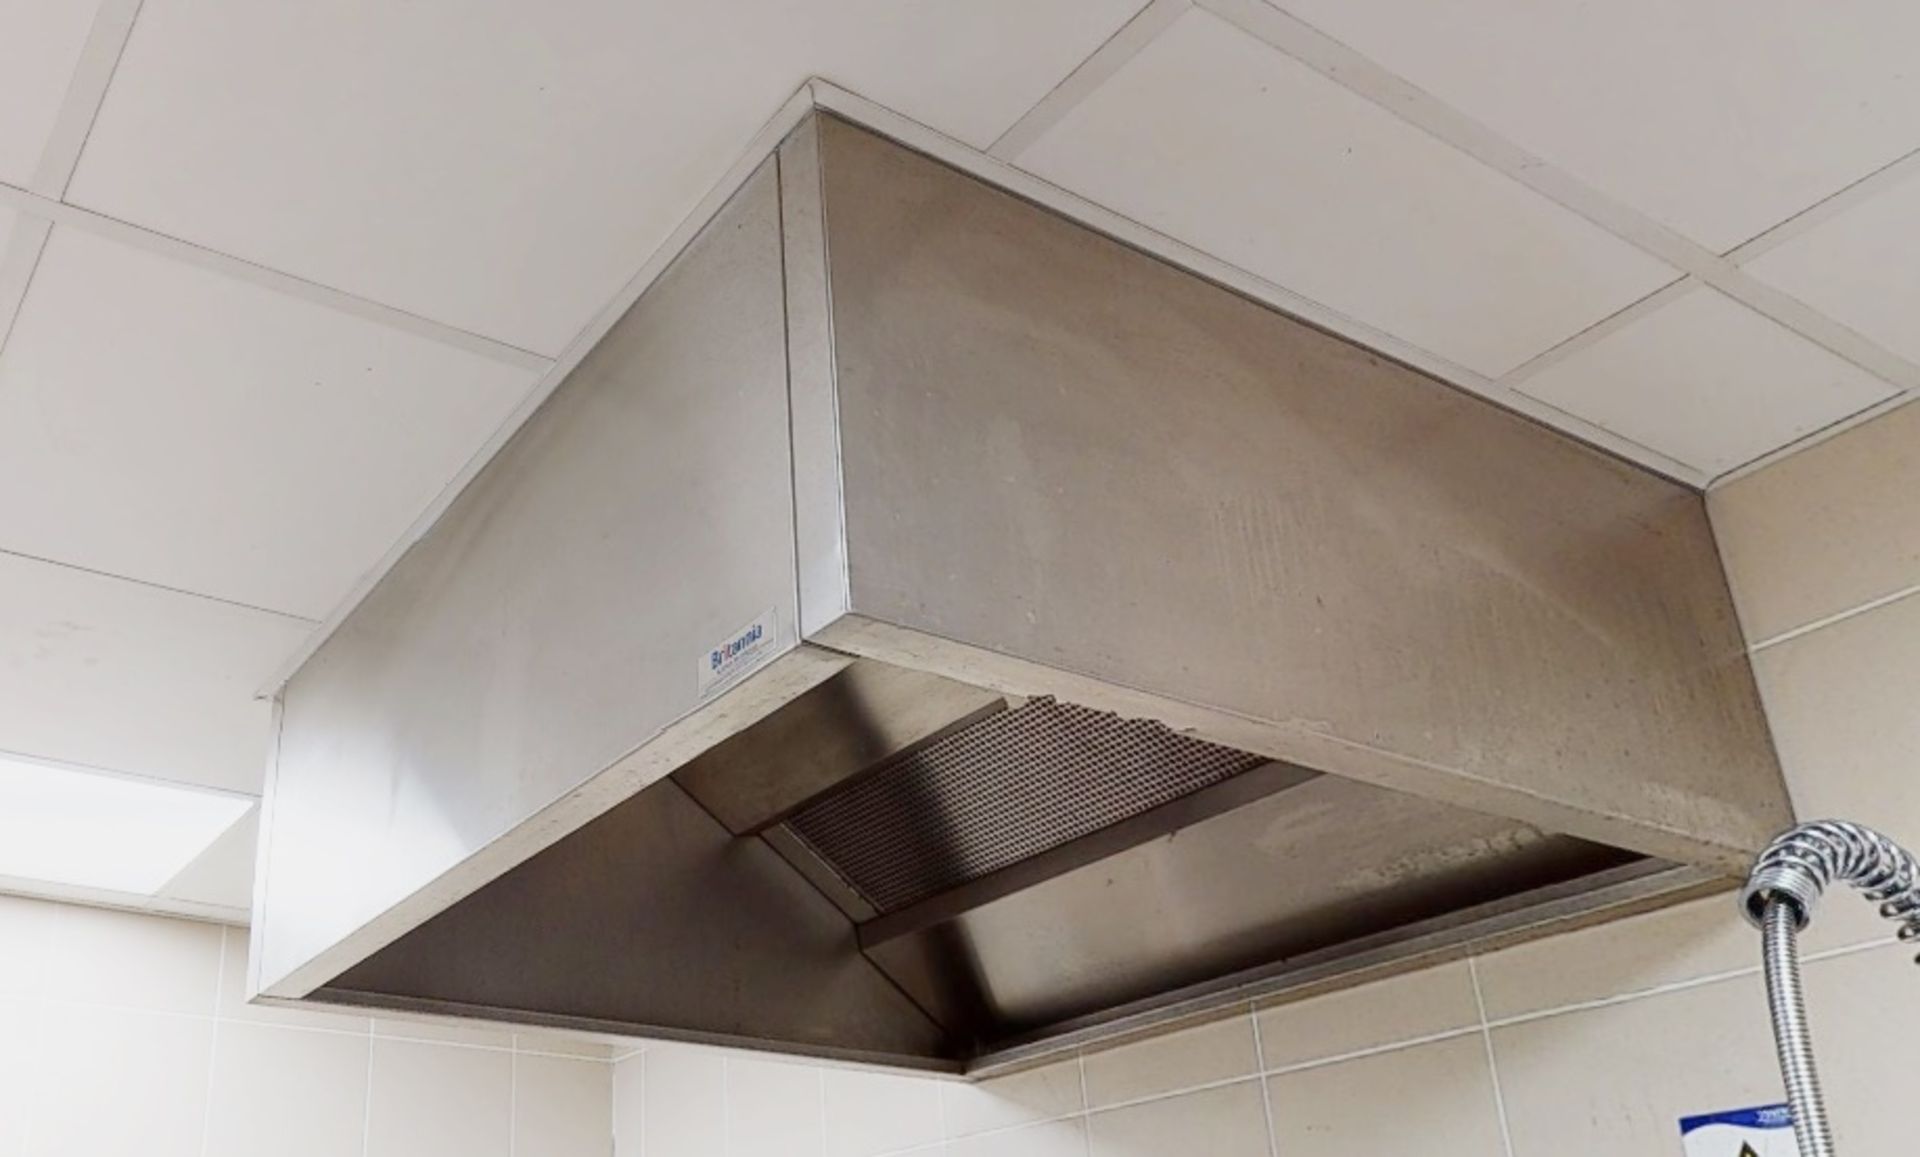 1 x Commercial Stainless Steel Extraction Canopy - CL701 - Location: Ashton Moss, Manchester, OL7 - Image 4 of 8